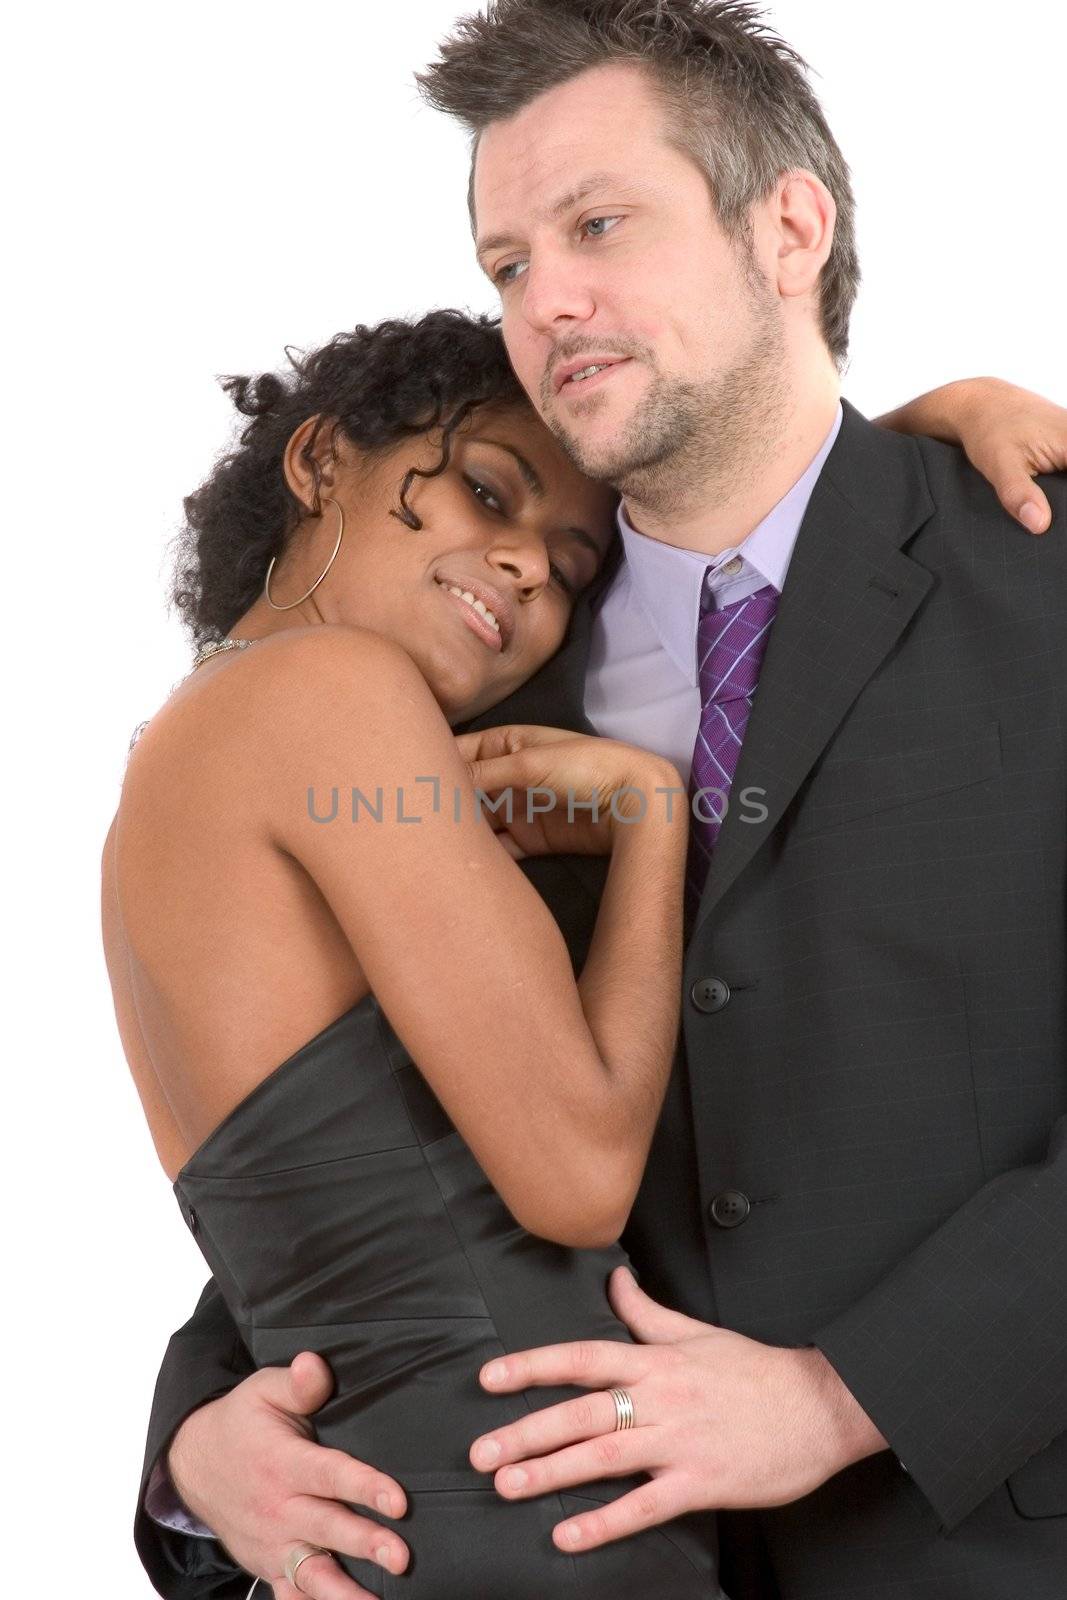 Woman leaning into her man